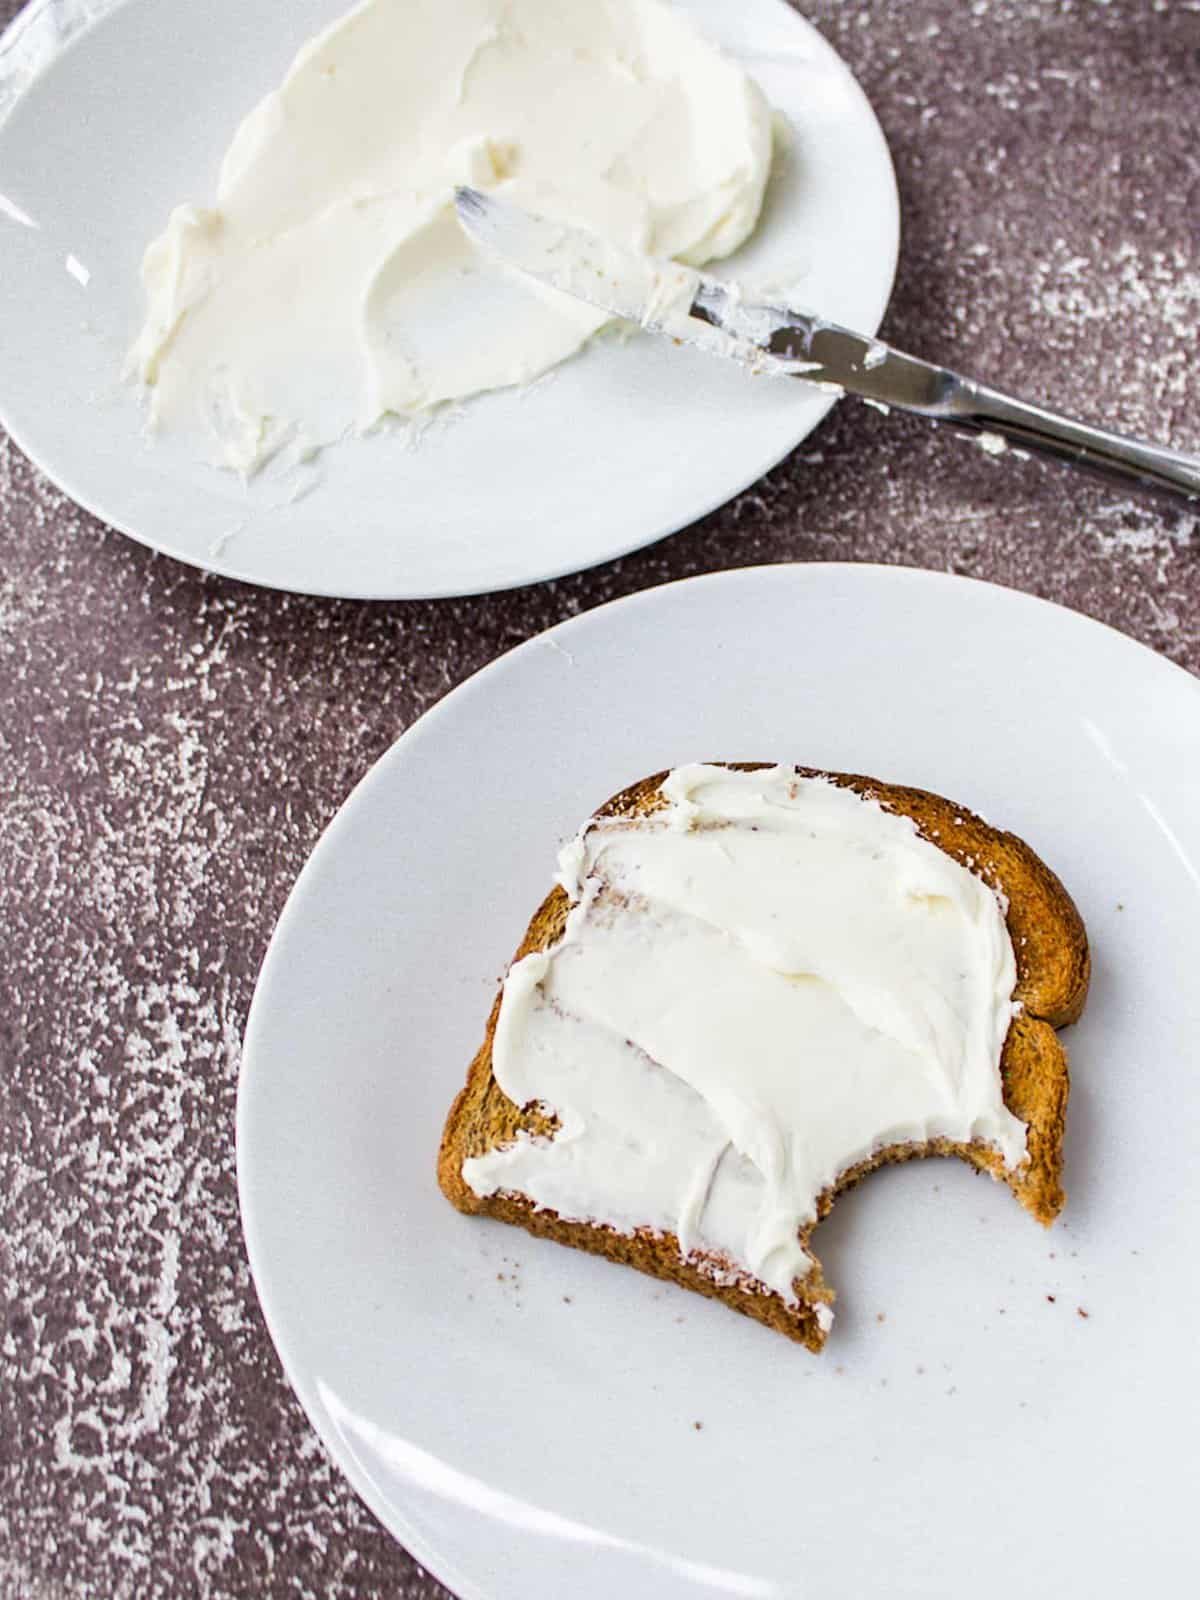 How Long Can Cream Cheese Sit Out?